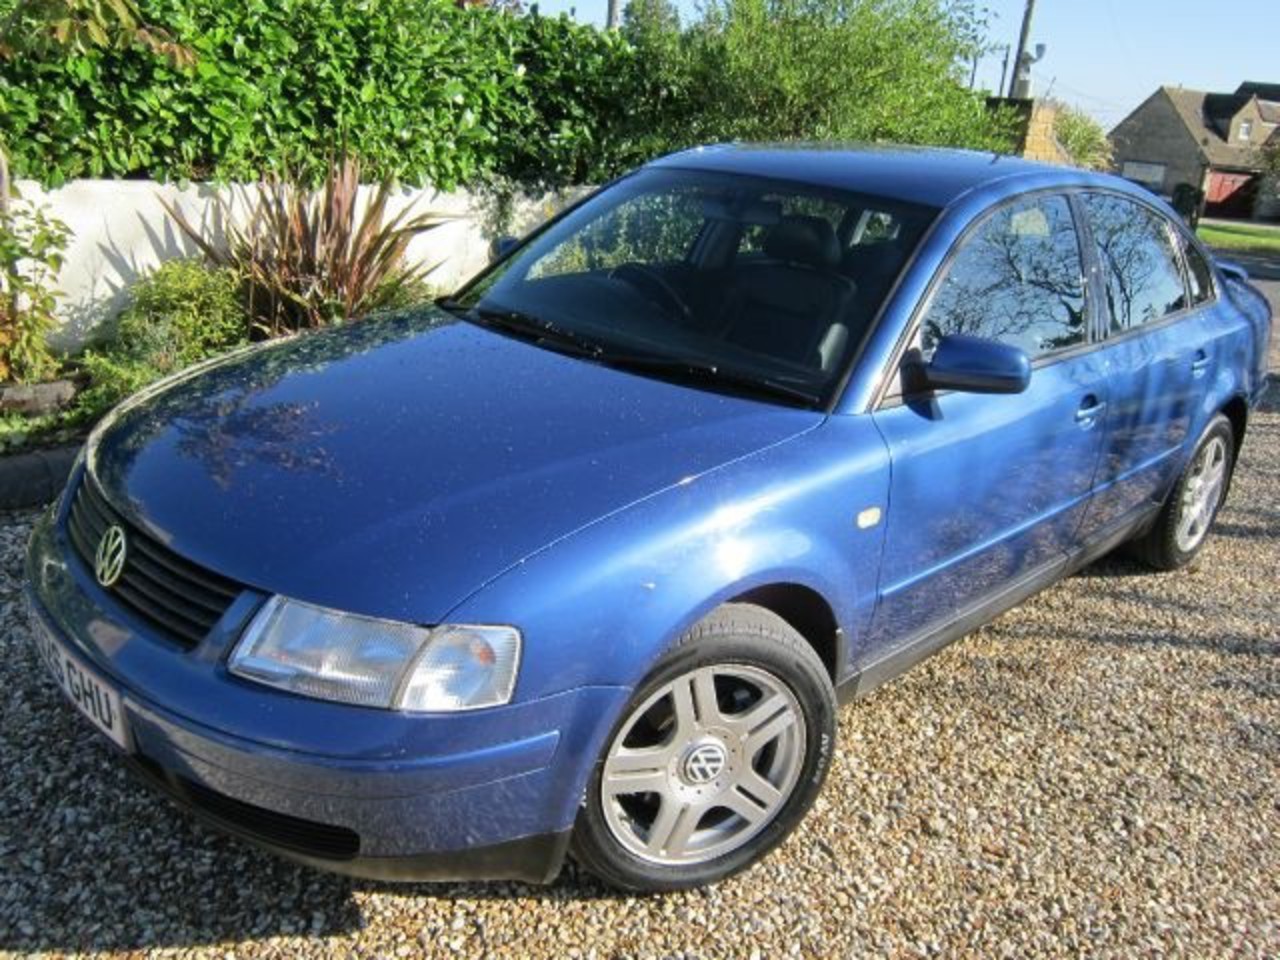 Volkswagen Passat V6 Syncro.FSH with 14 service stamps. for sale ...